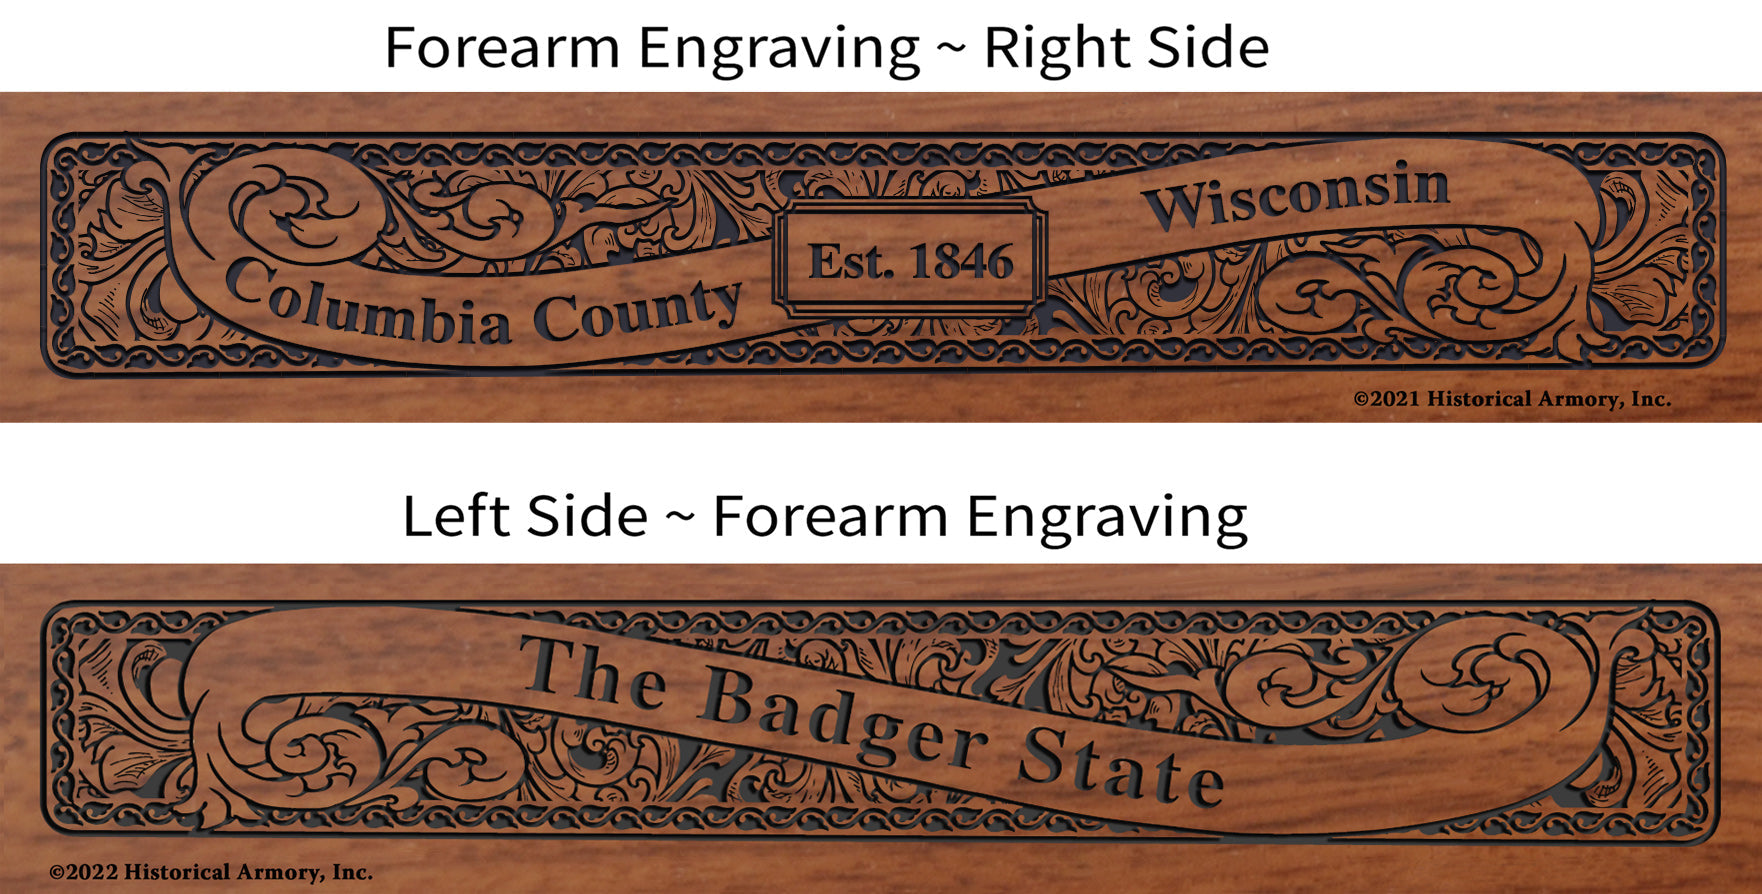 Columbia County Wisconsin Engraved Rifle Forearm